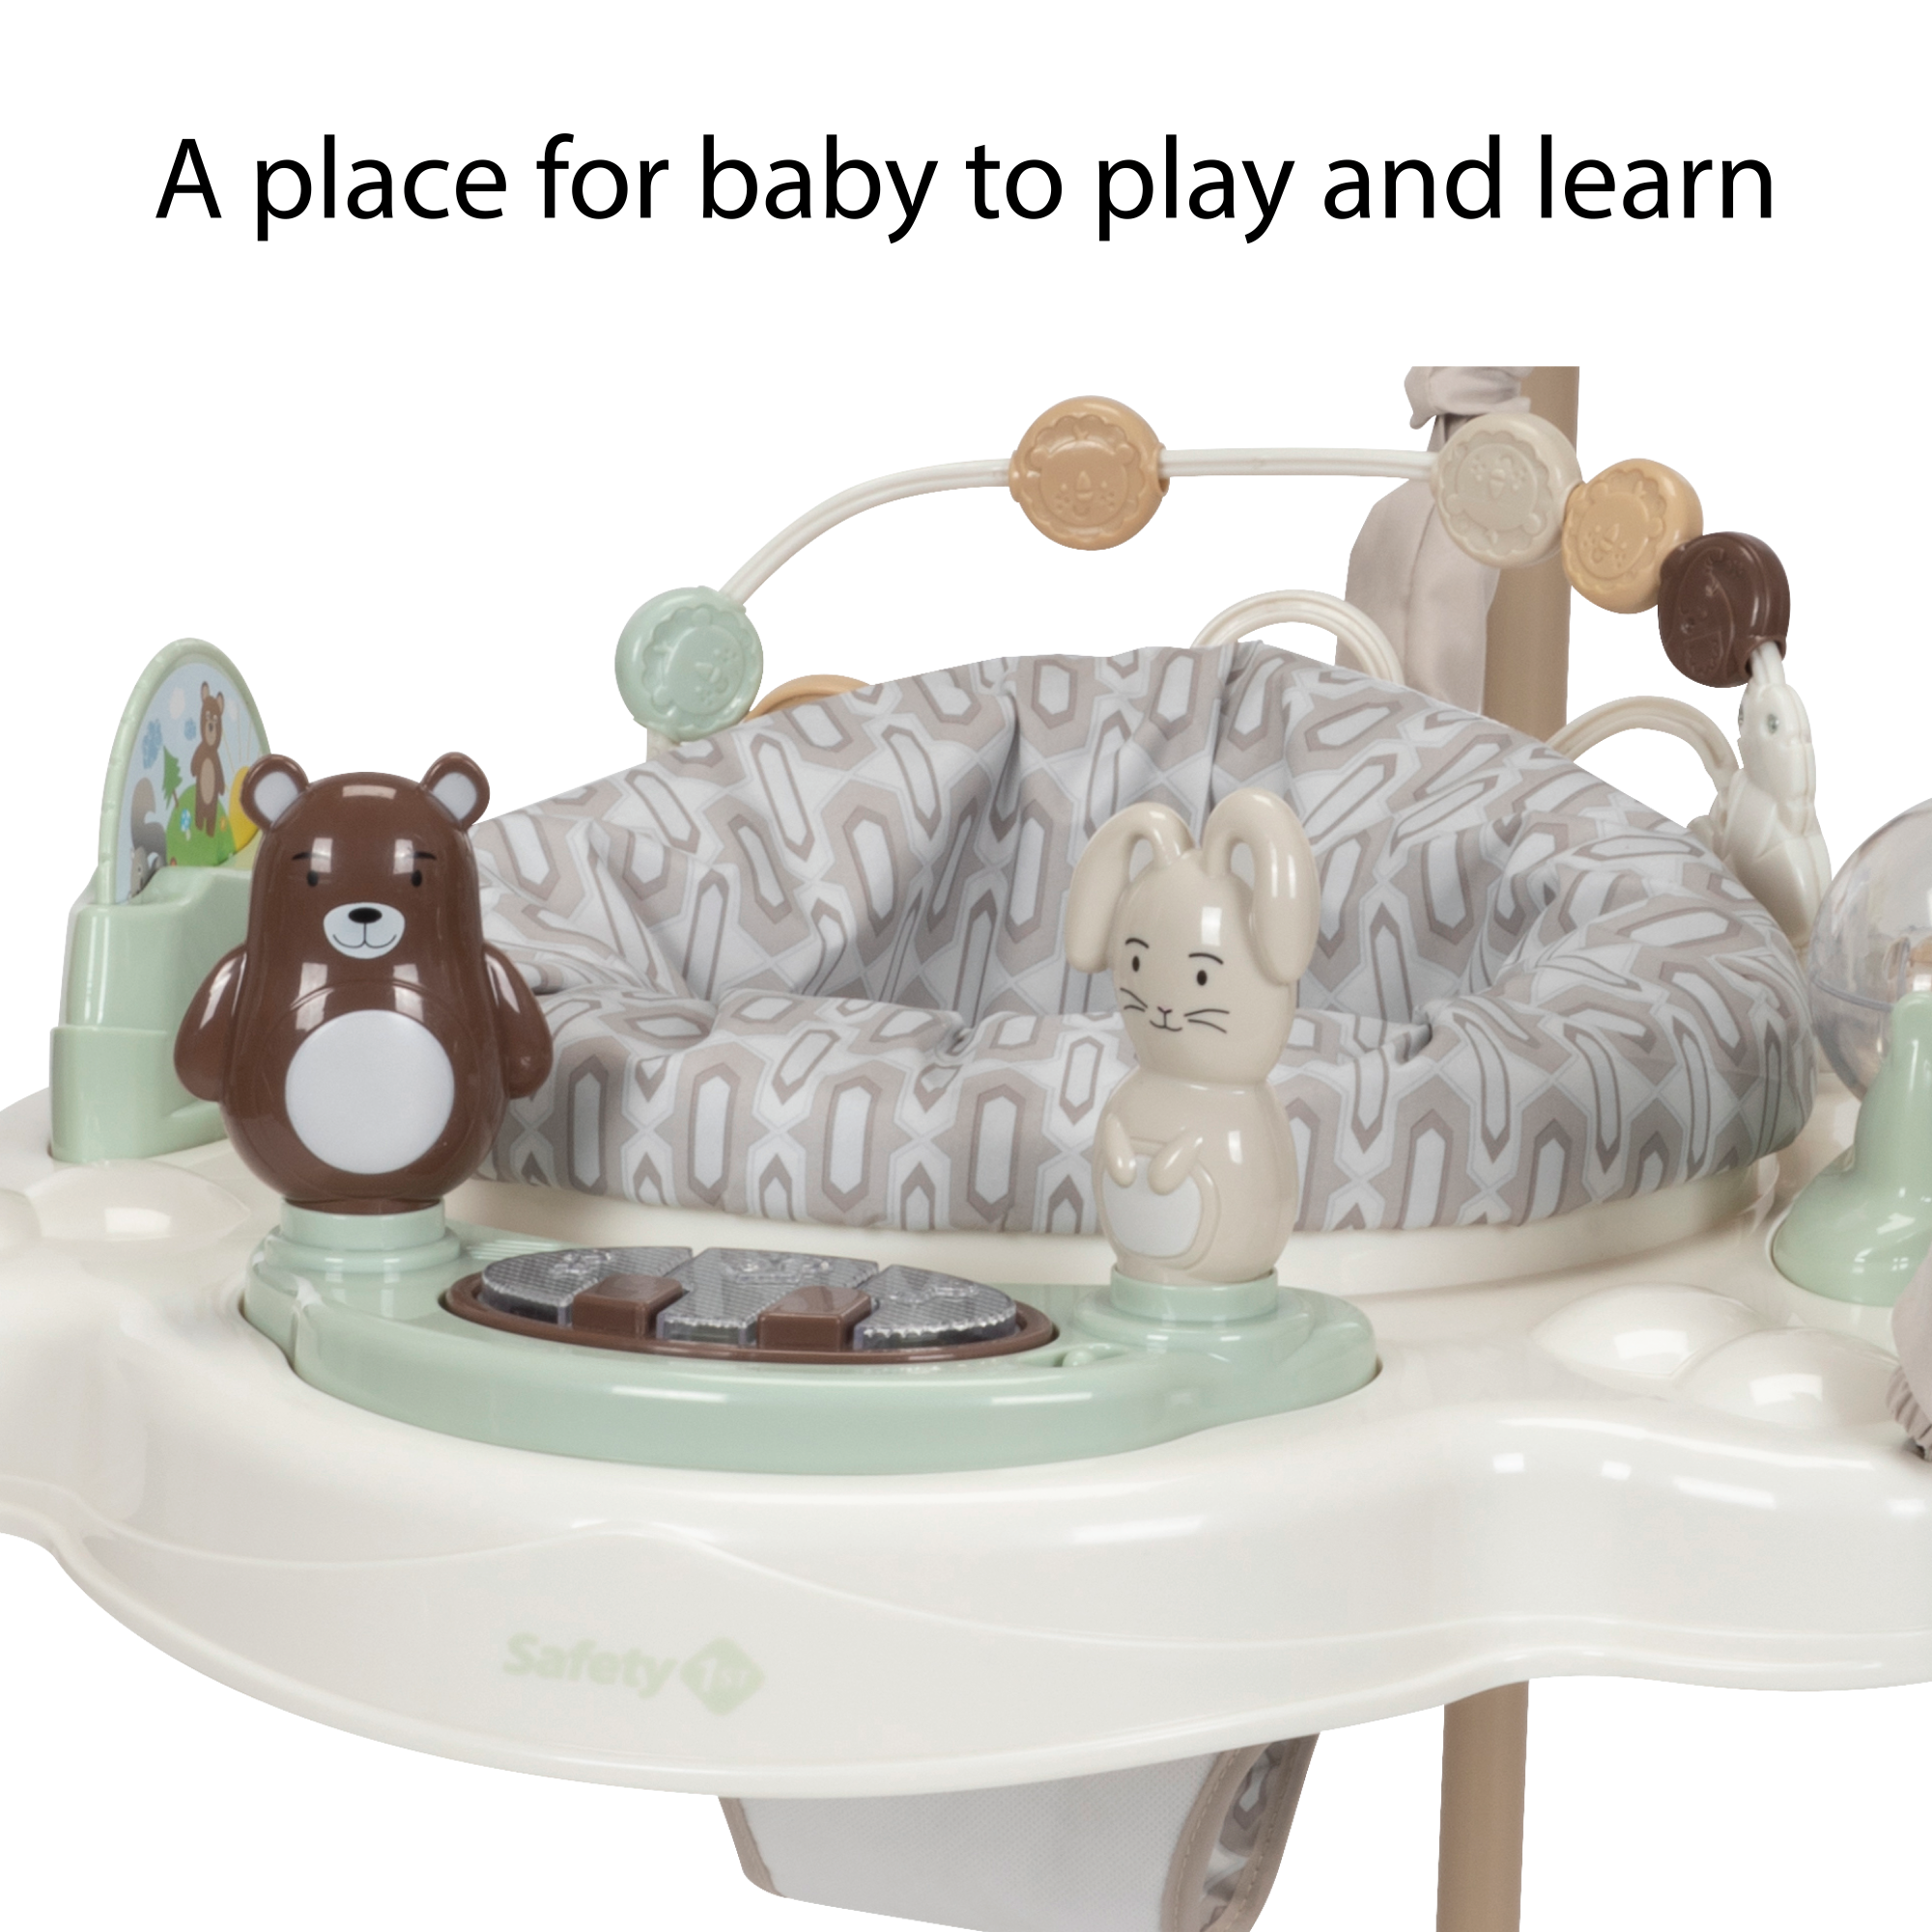 Bob-and-Twist™ Activity Center - easy to clean and convenient